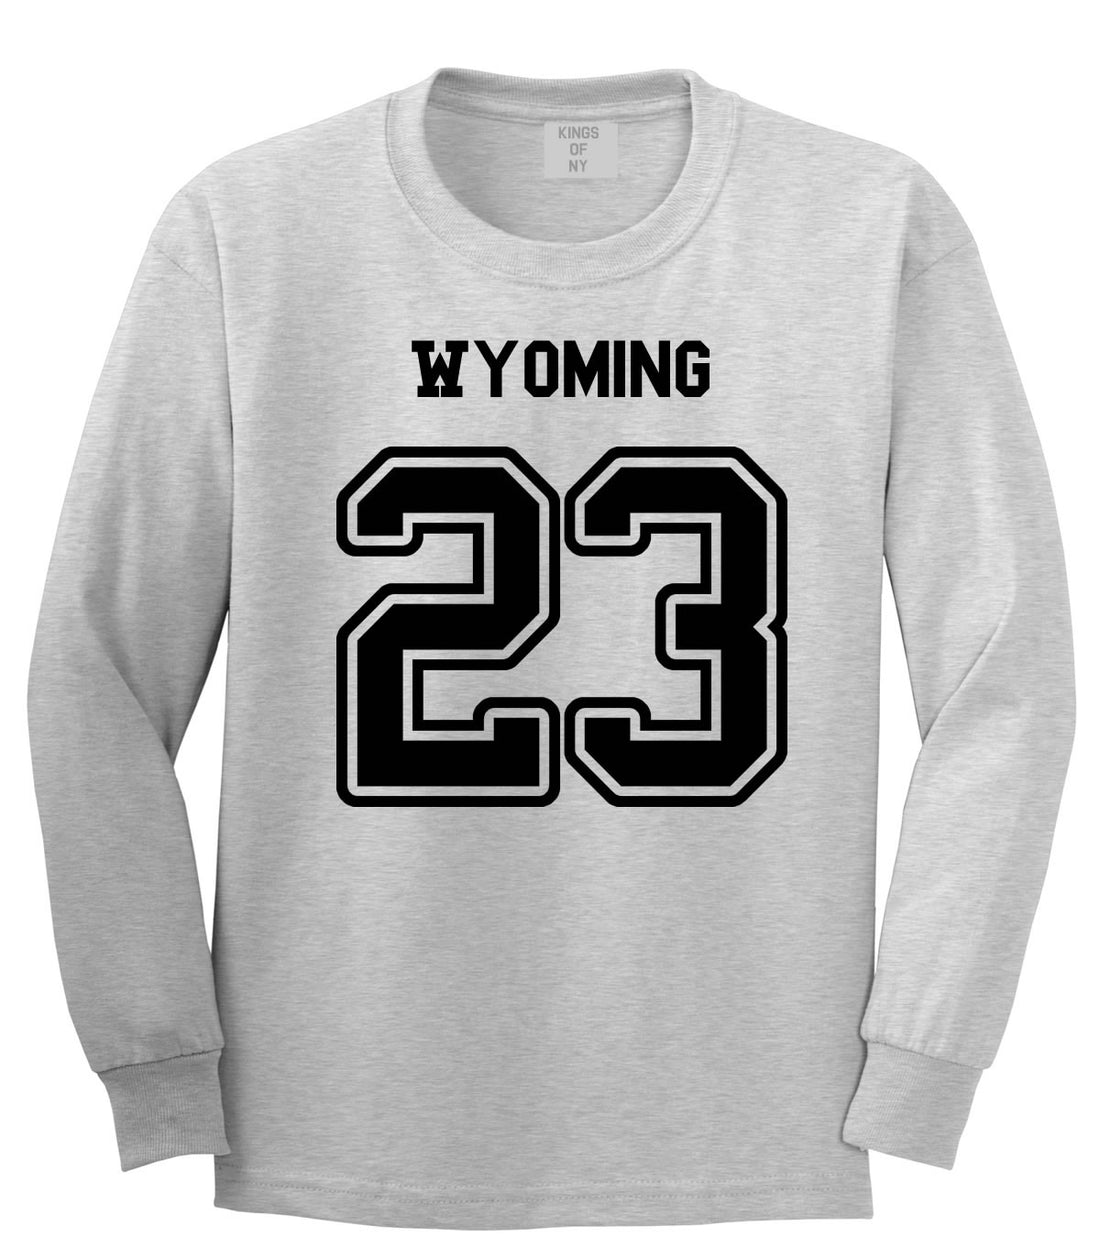 Sport Style Wyoming 23 Team State Jersey Long Sleeve T-Shirt By Kings Of NY